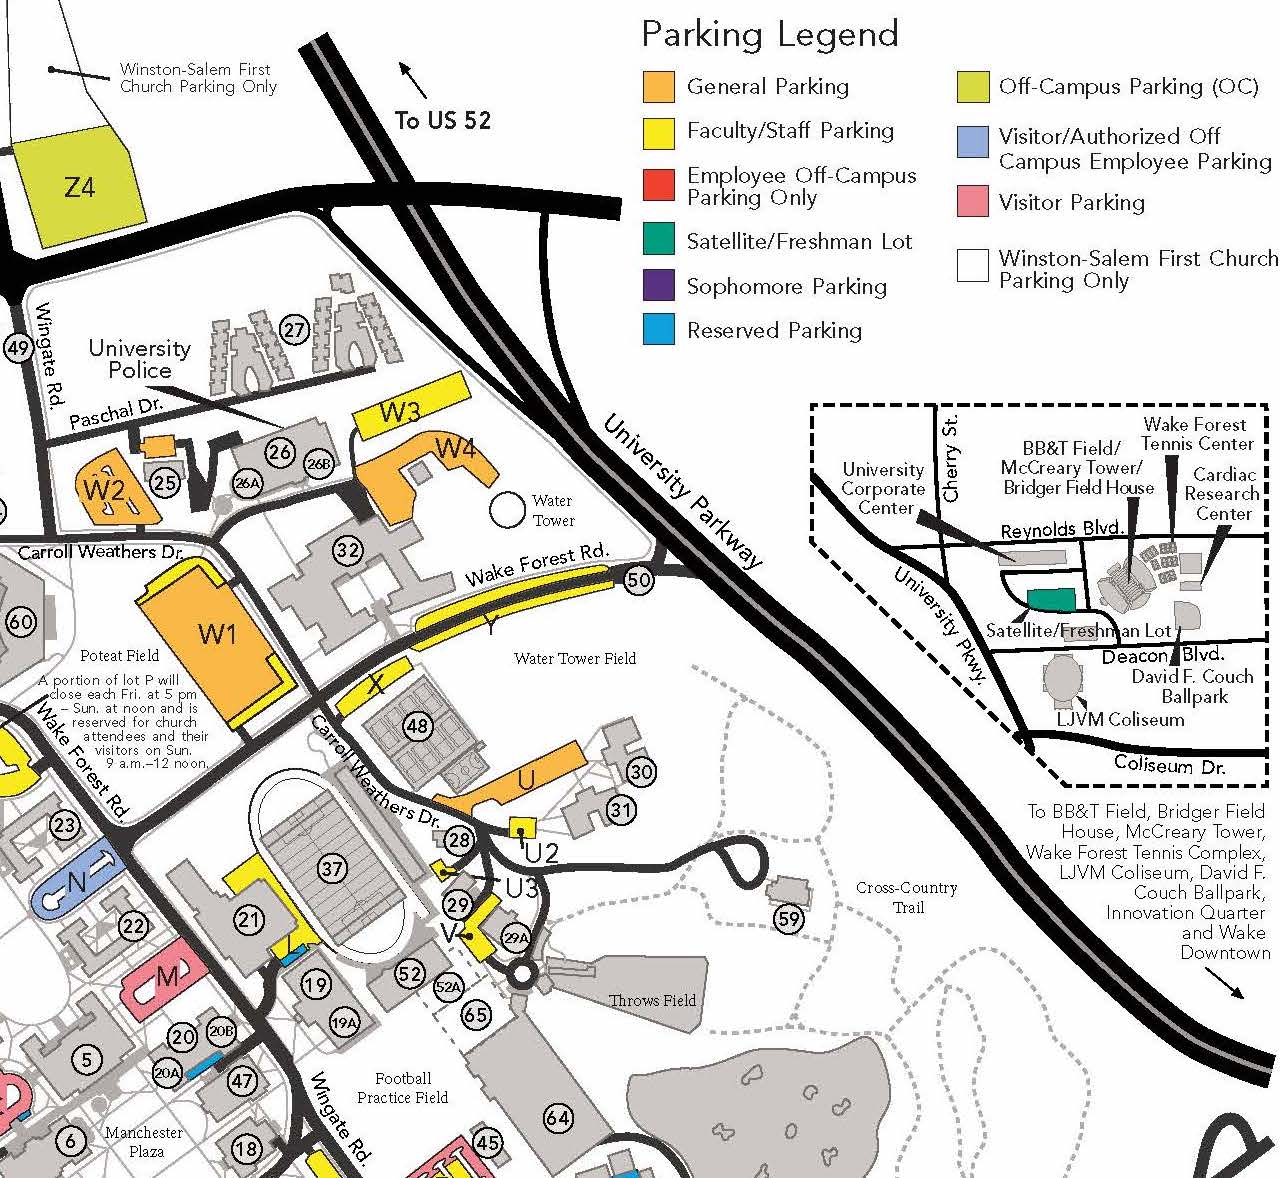 Campus parking map showing parking lots X and W1